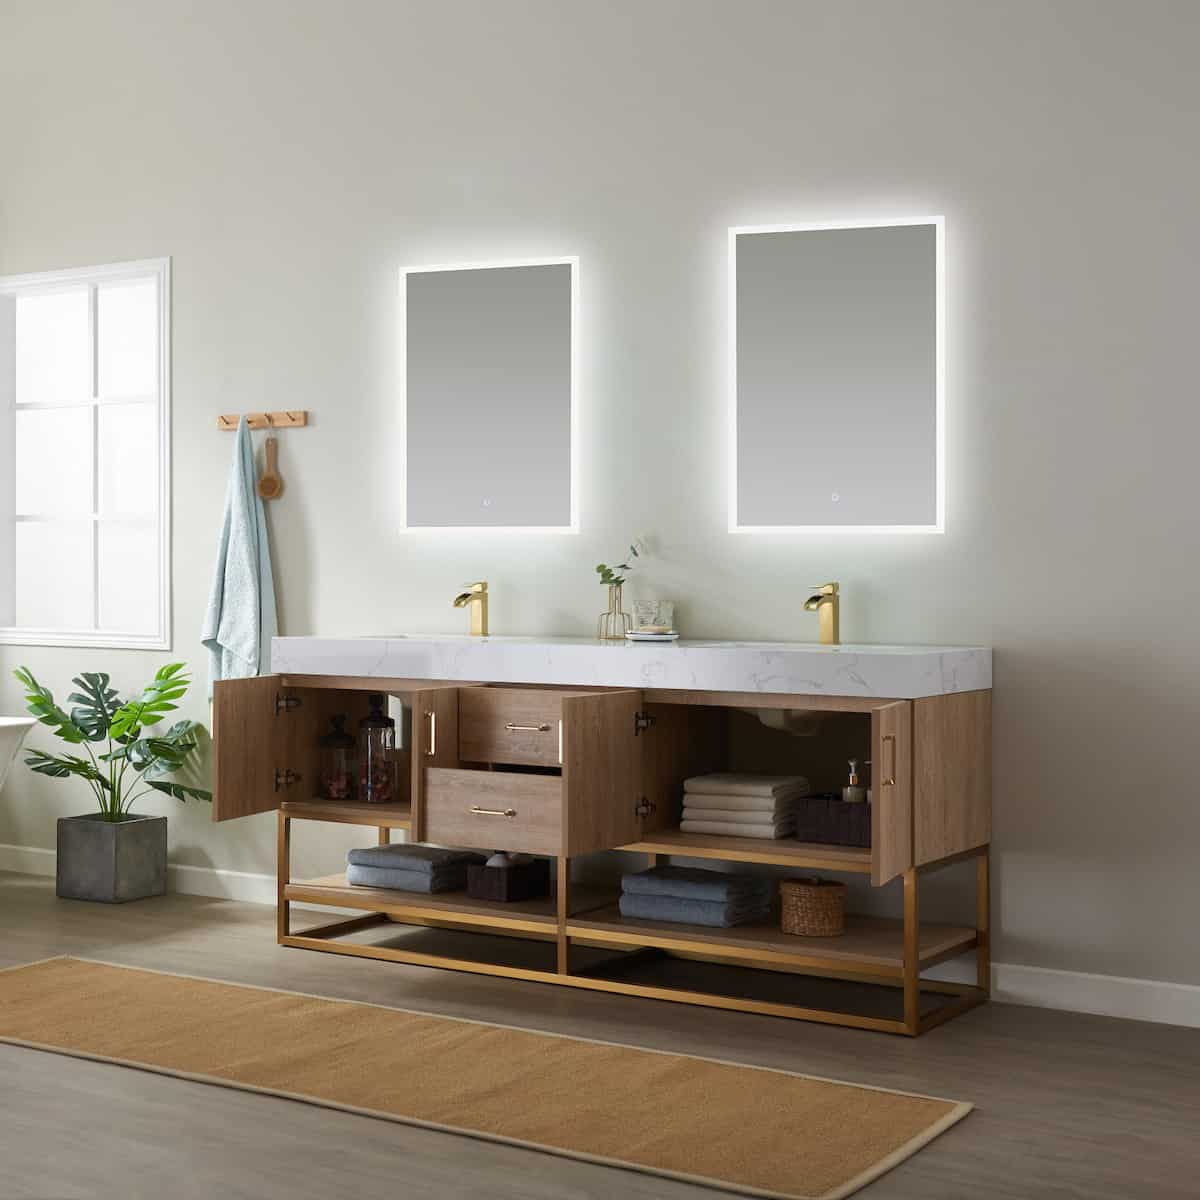 Vinnova Alistair 72 Inch Freestanding Double Vanity in North American Oak and Brushed Gold Frame with White Grain Stone Countertop With Mirrors Inside 789072-NO-GW